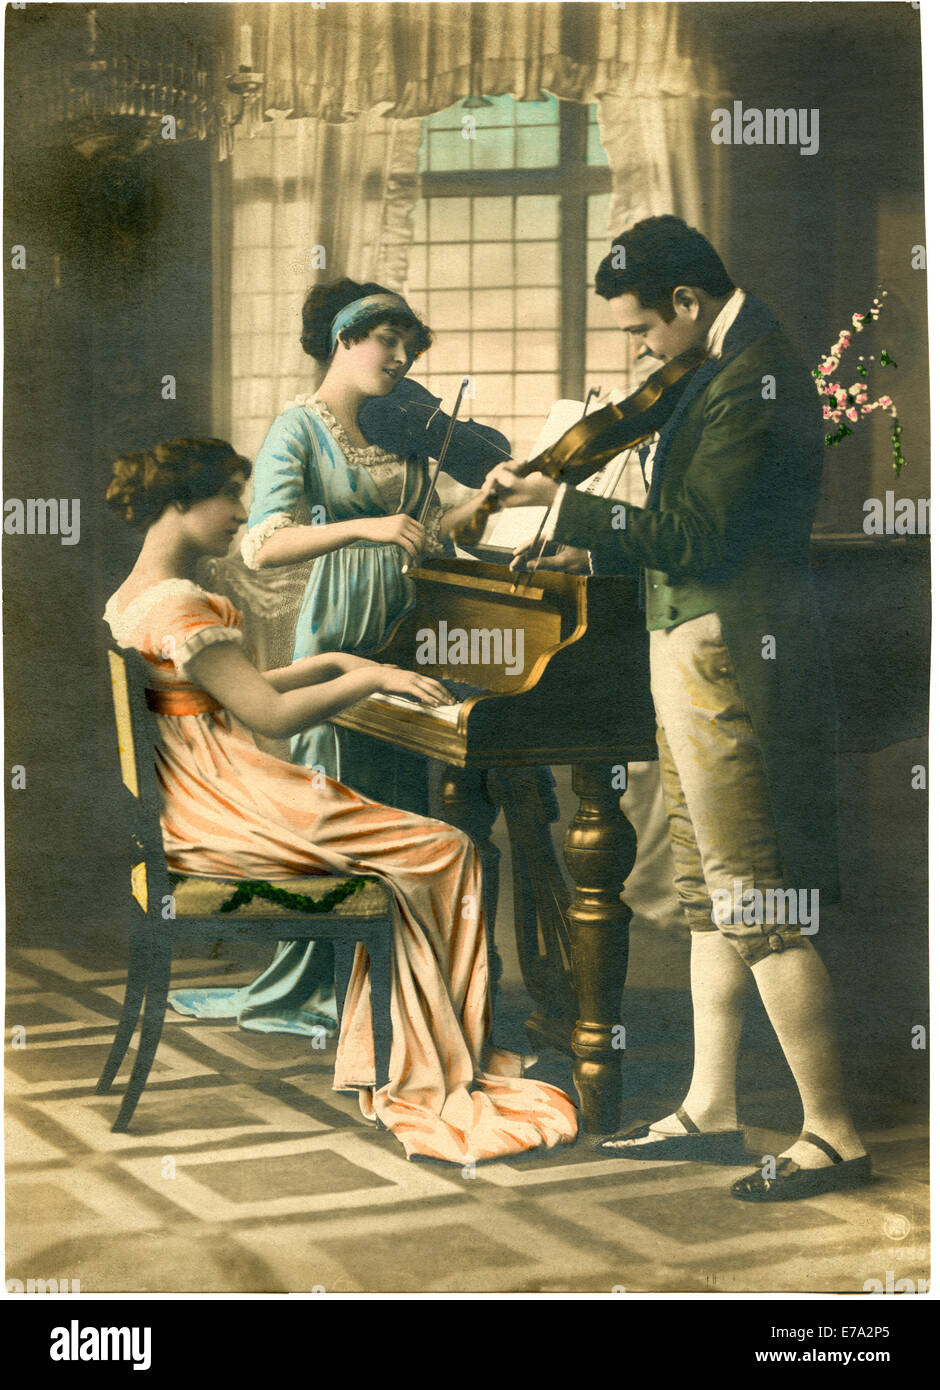 Trio Musical, l'Allemagne, Hand-Colored Photo, vers 1900 Banque D'Images